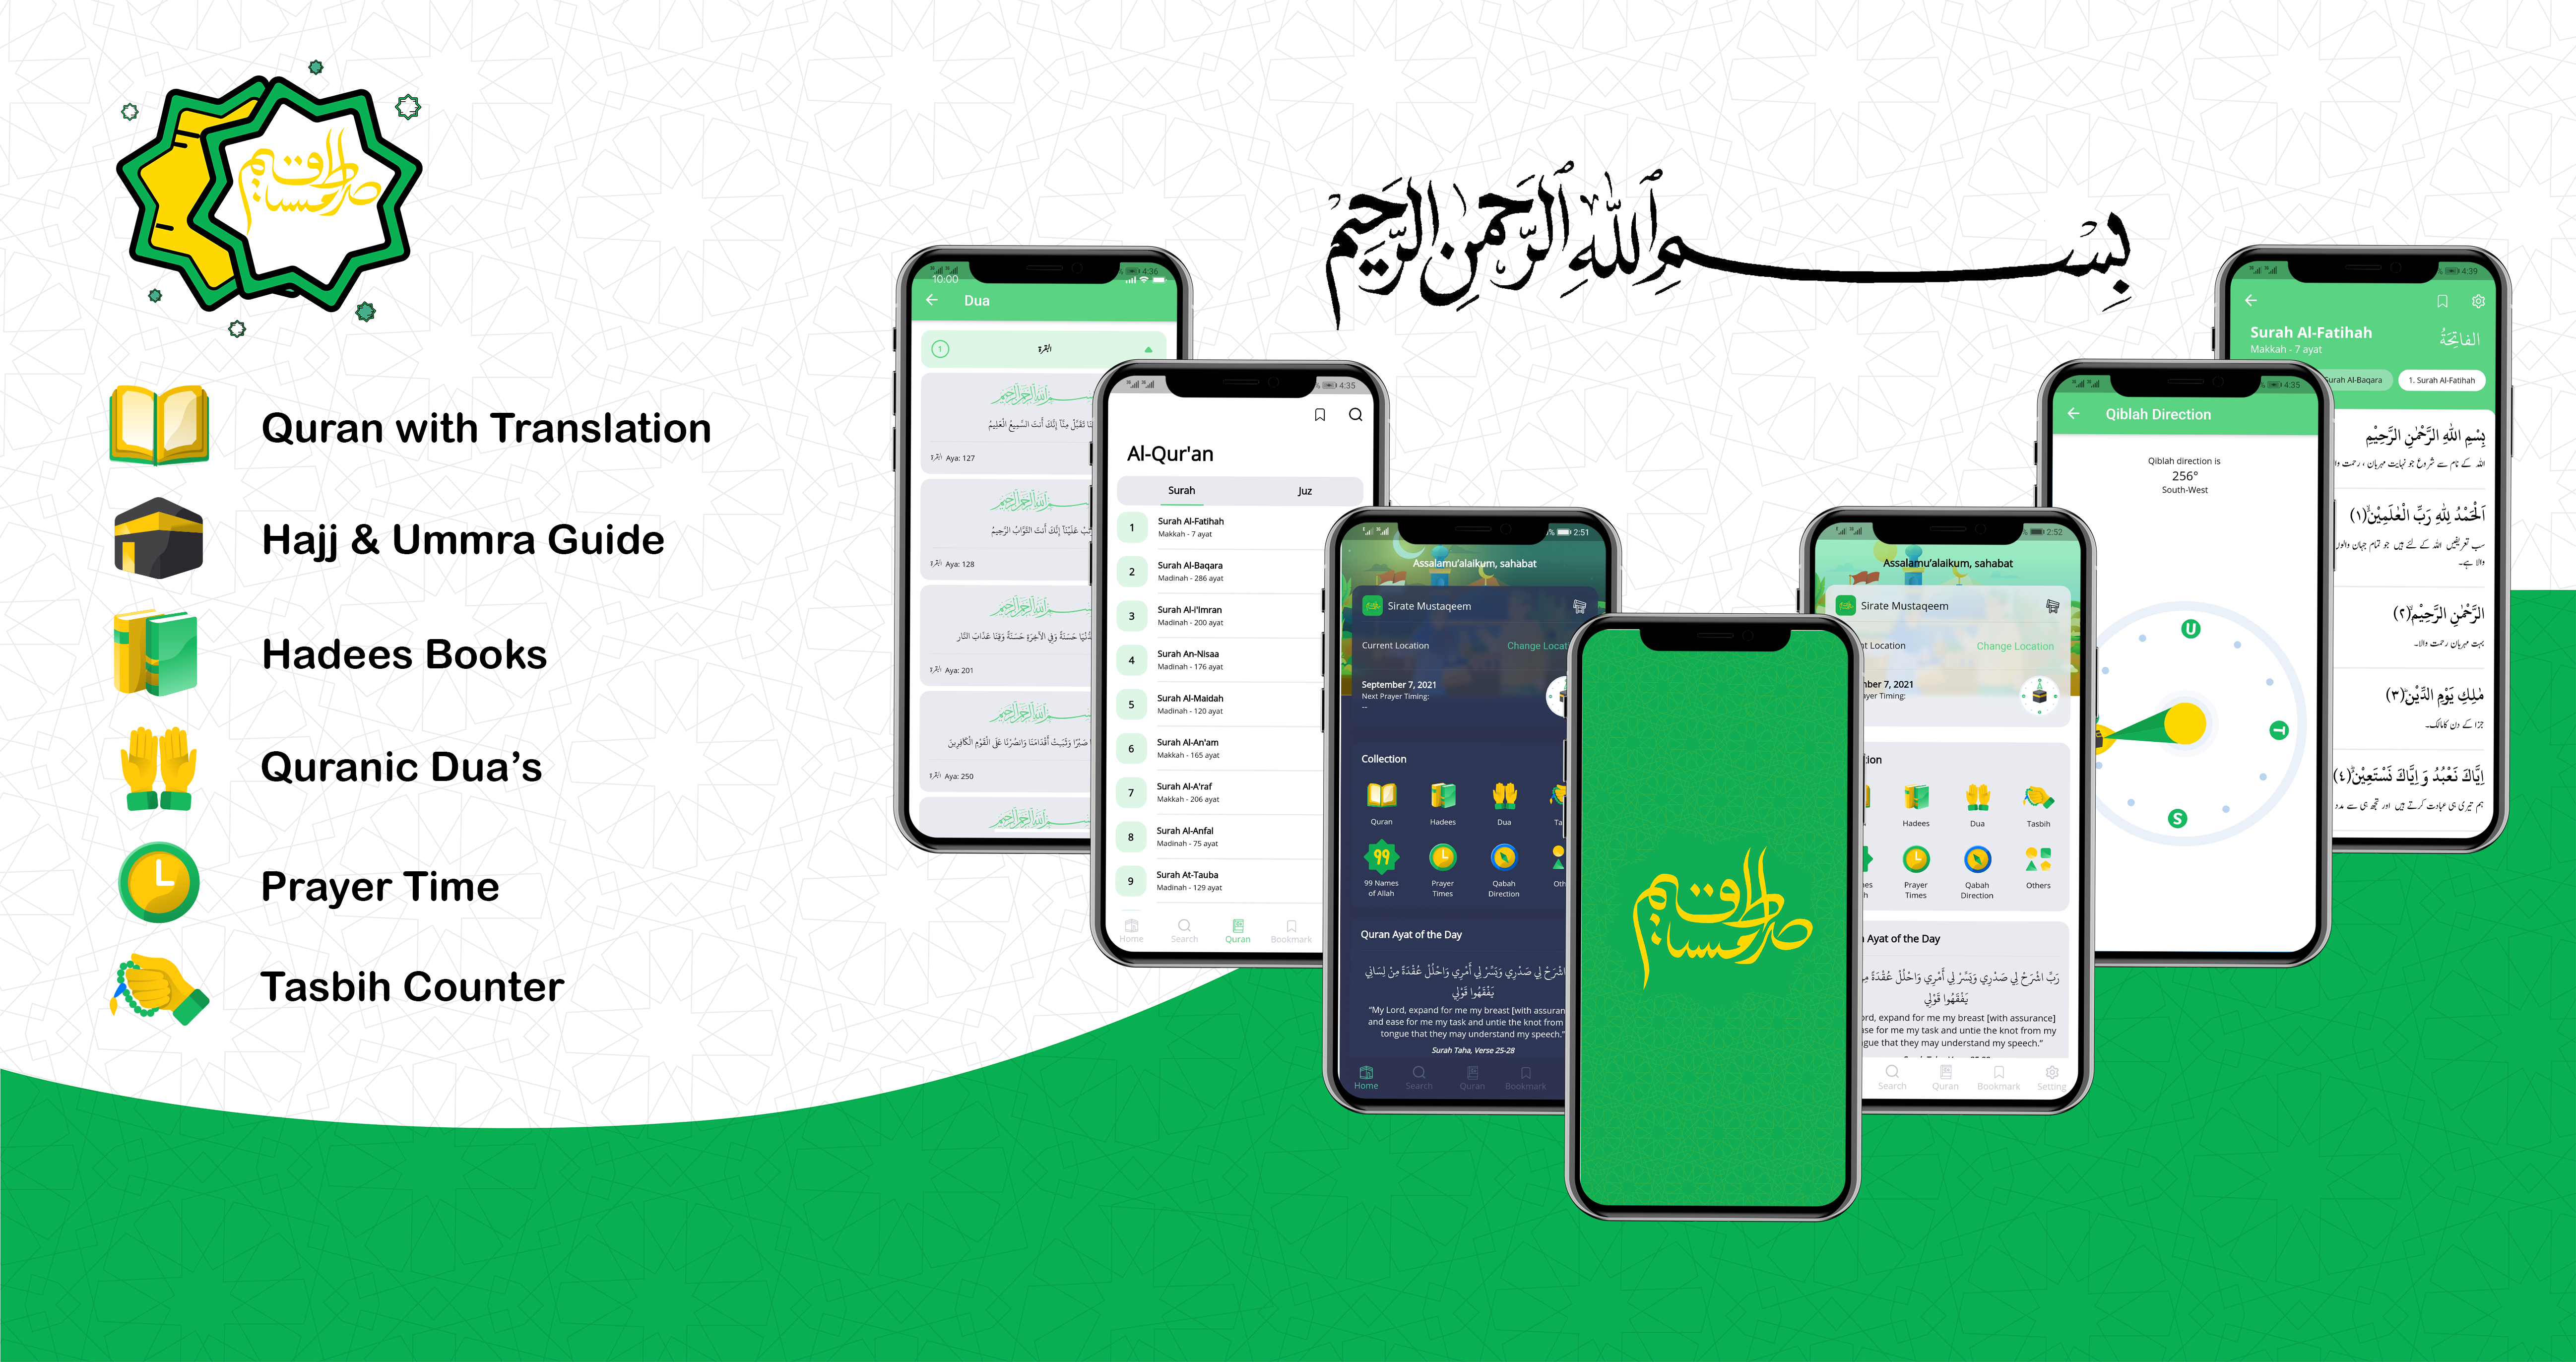 Islamic App with Complete Quran, Prayer time Api, Hadith, & Qibla Direction